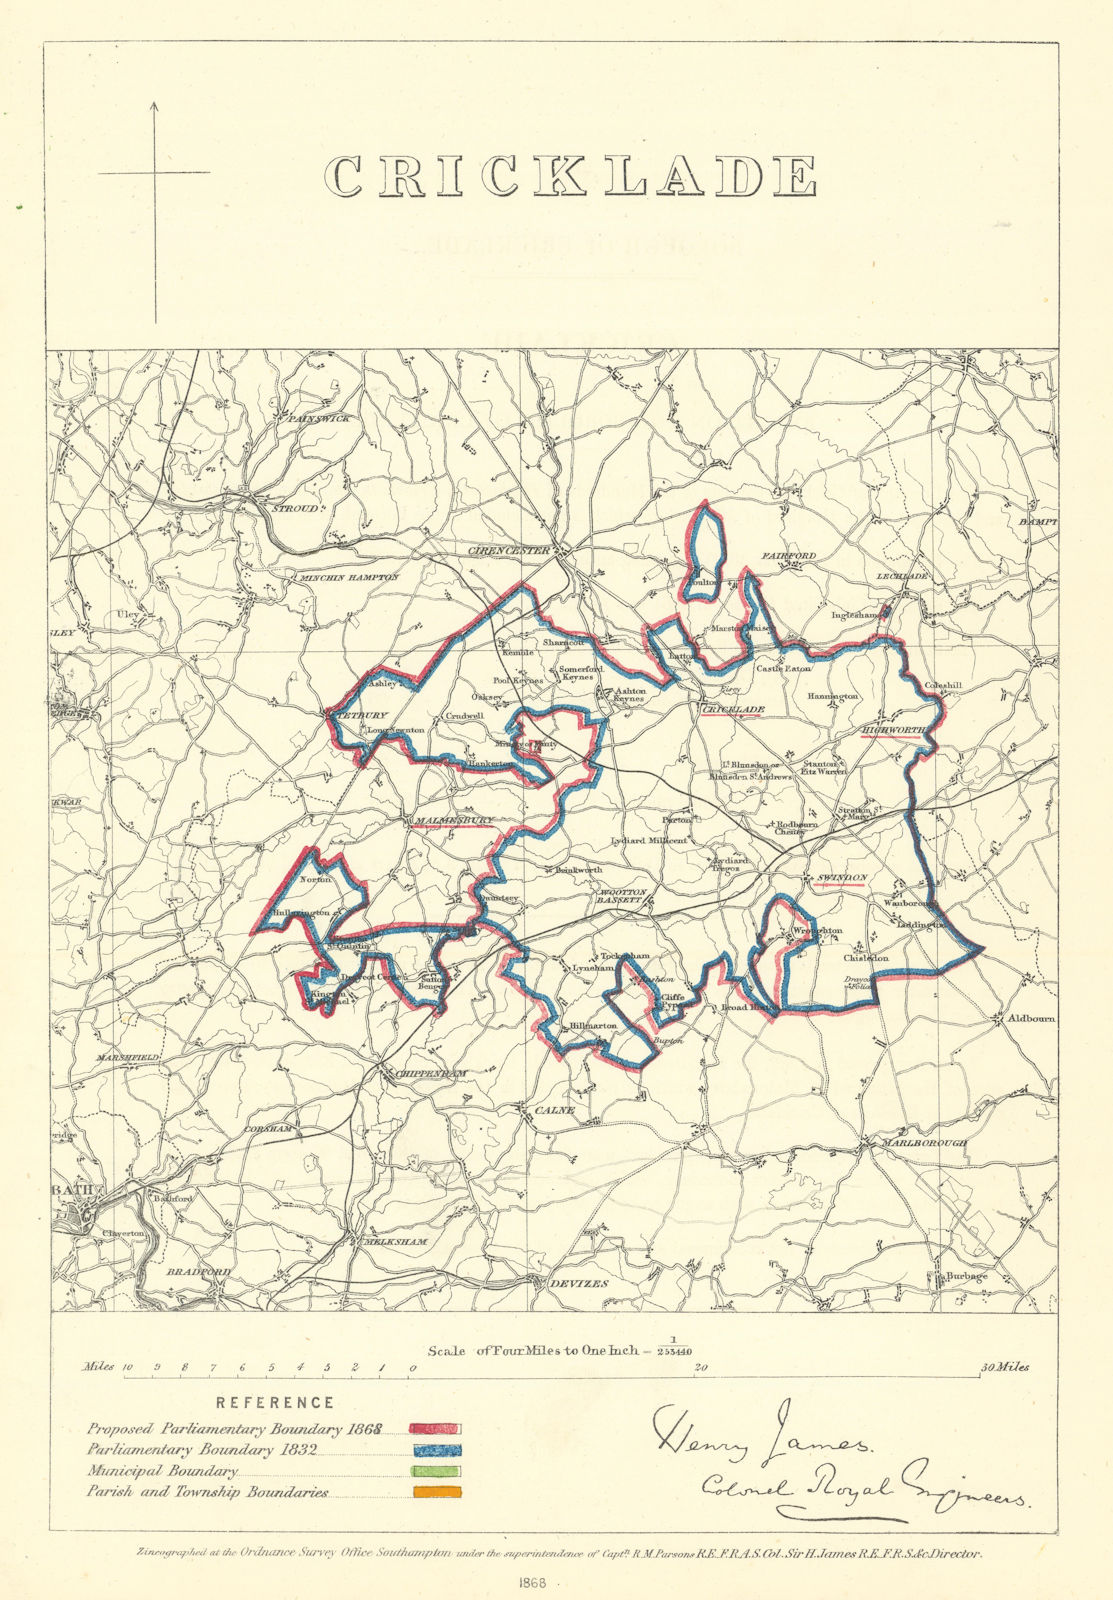 Associate Product Cricklade, Wiltshire. JAMES. Parliamentary Boundary Commission 1868 old map